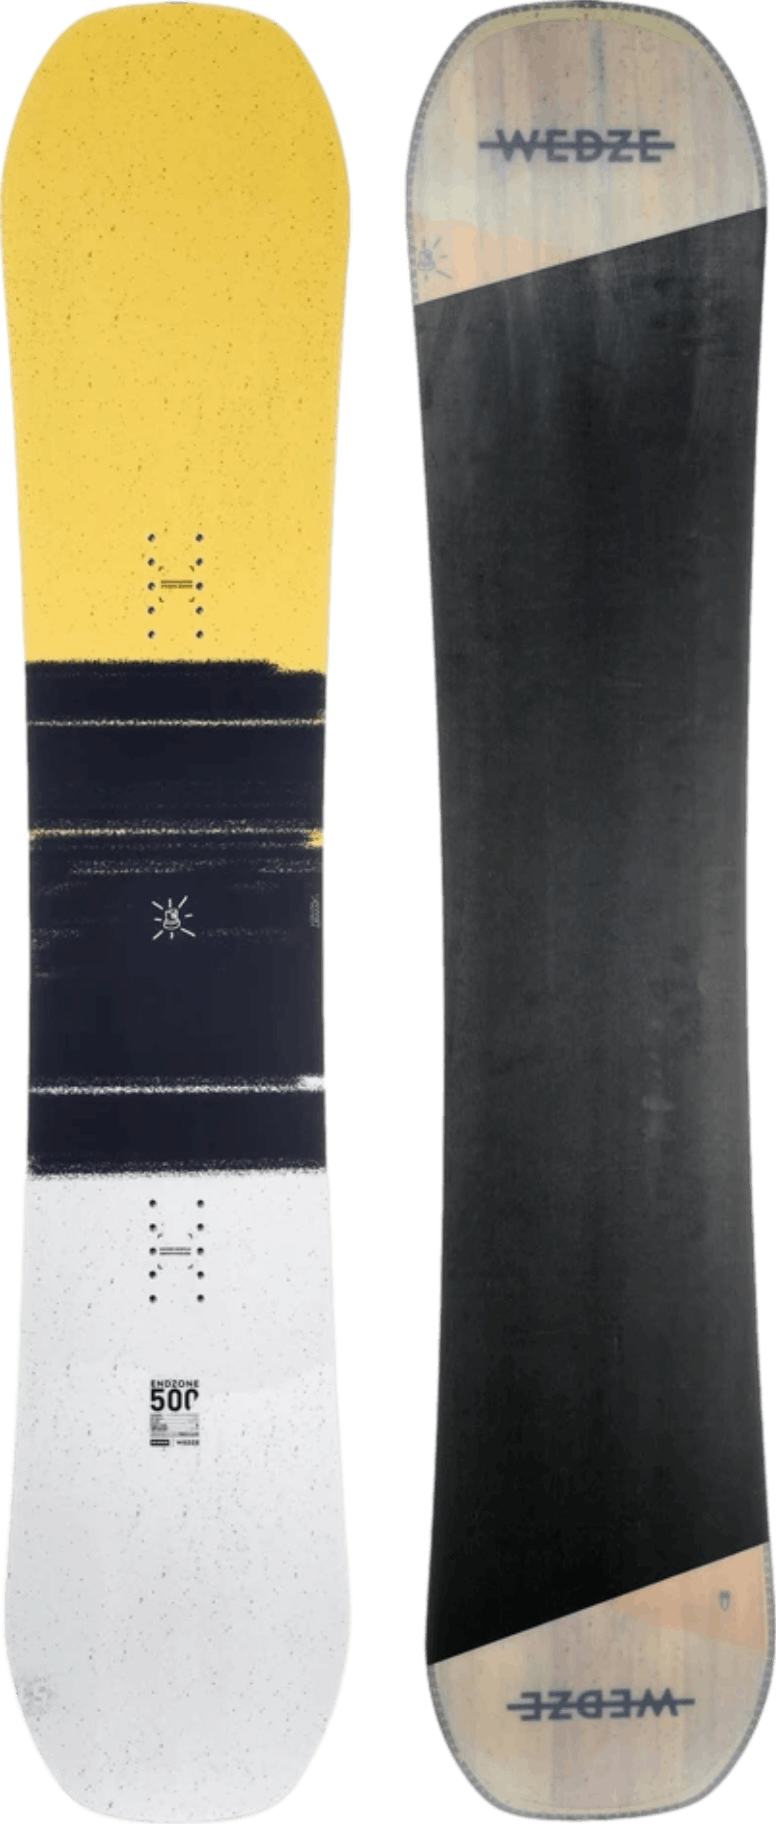 Billy Goat elk Phalanx Top 5 Dreamscape Men's Snowboards of 2022 | Curated.com